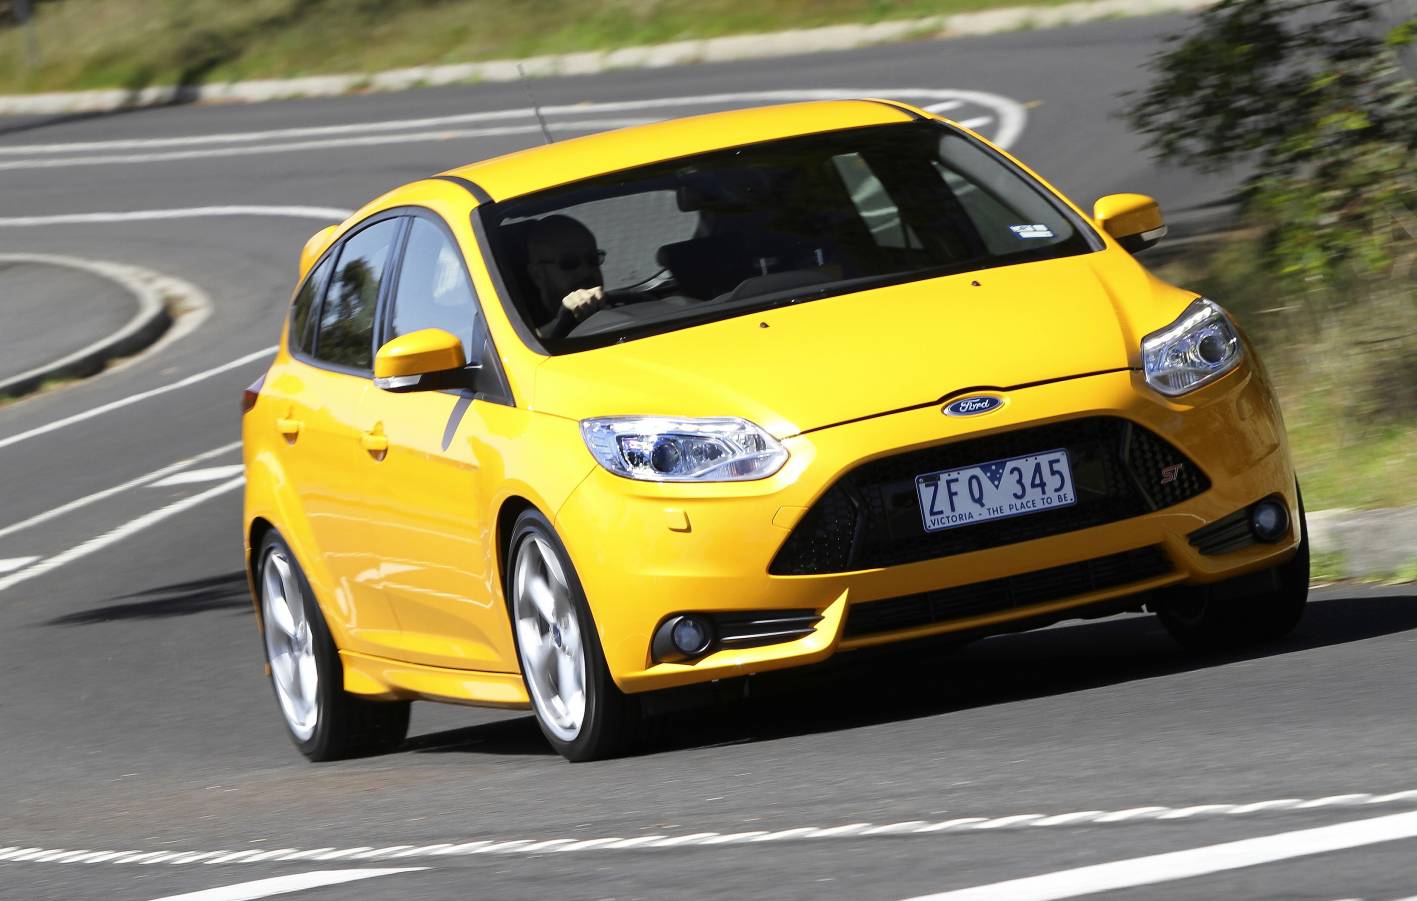 Ford Focus ST gets Emergency Assistance system via SYNC